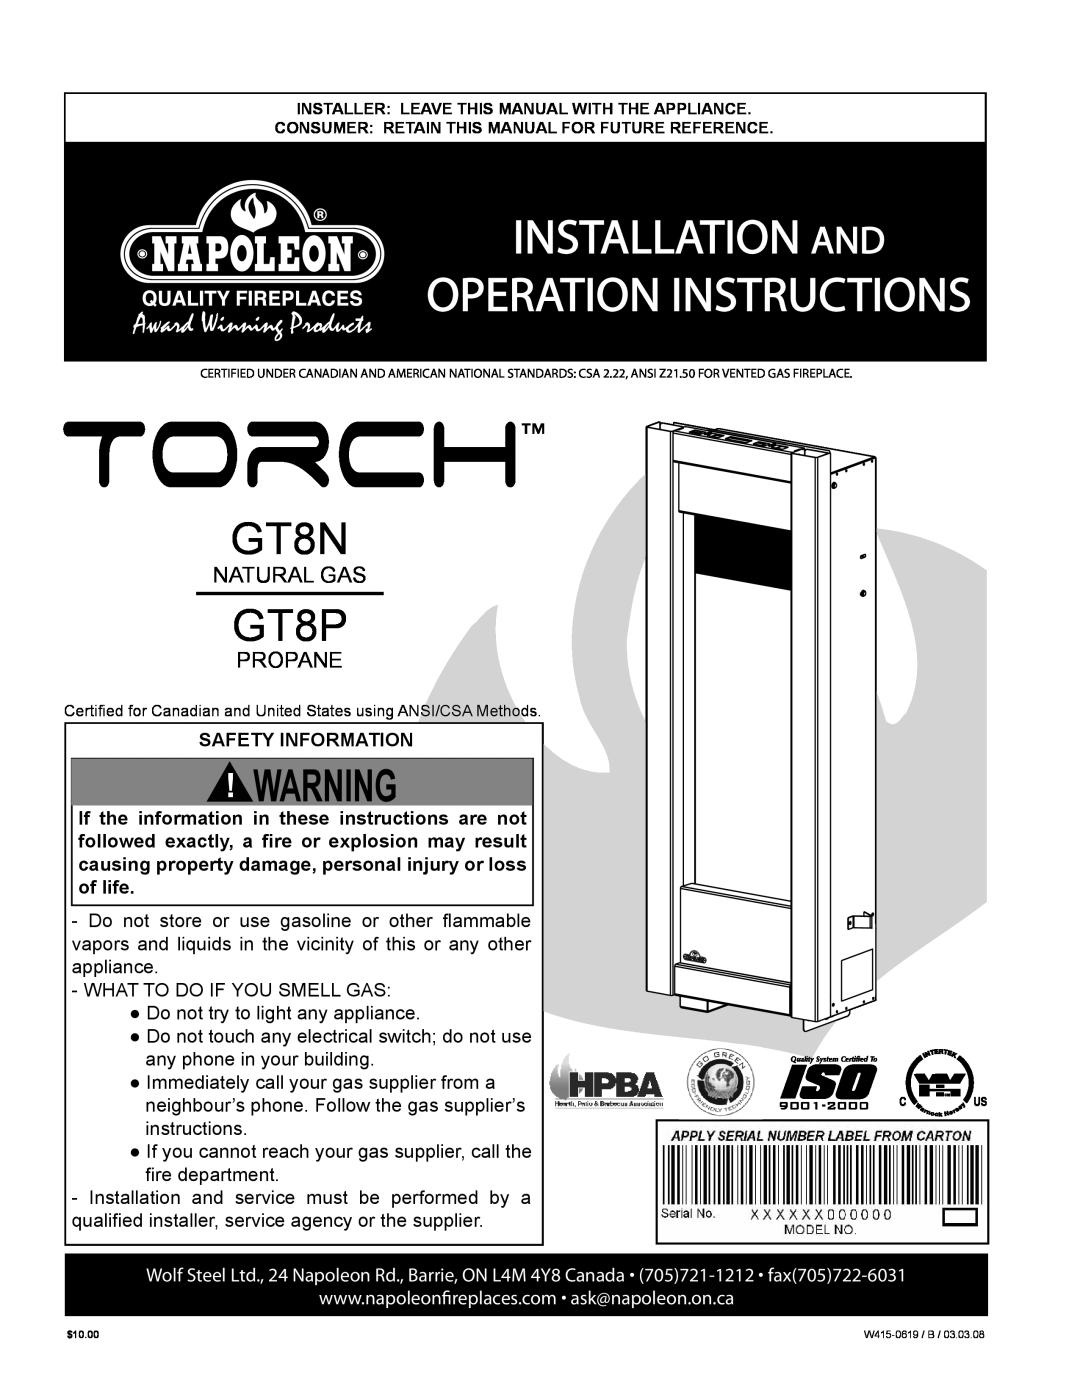 Napoleon Fireplaces GT8P manual Installation And Operation Instructions, GT8N, Natural Gas, Propane, Safety Information 